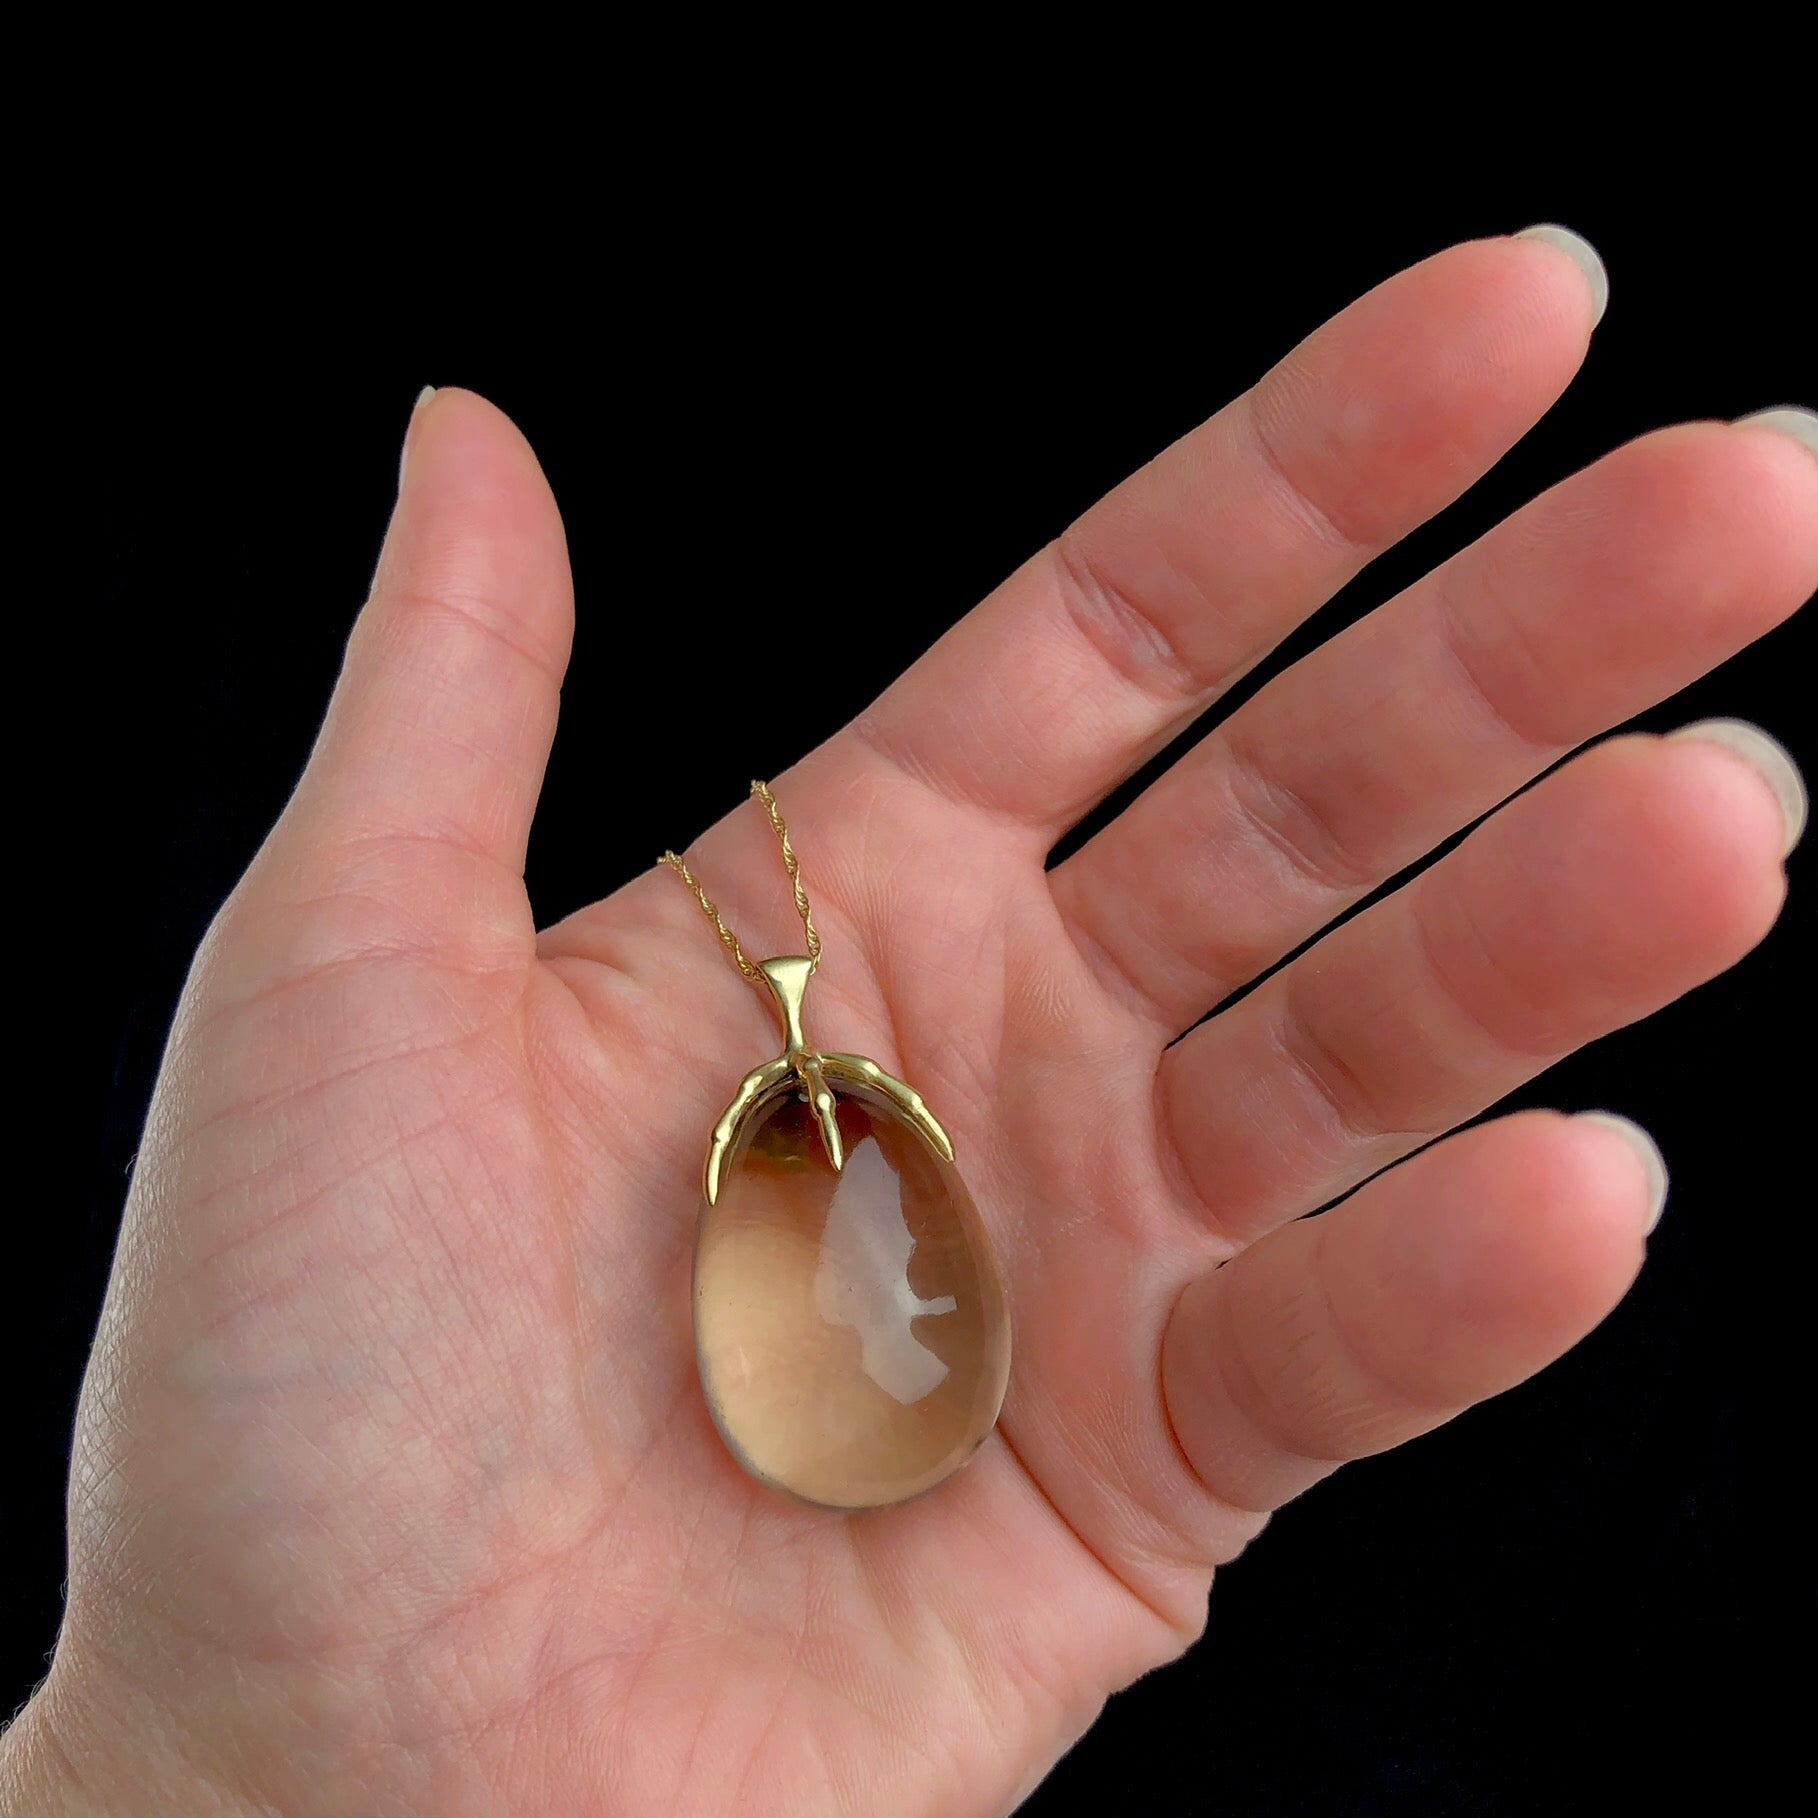 Egg shaped smokey grey colored quartz crystal held by a gold talon held in hand